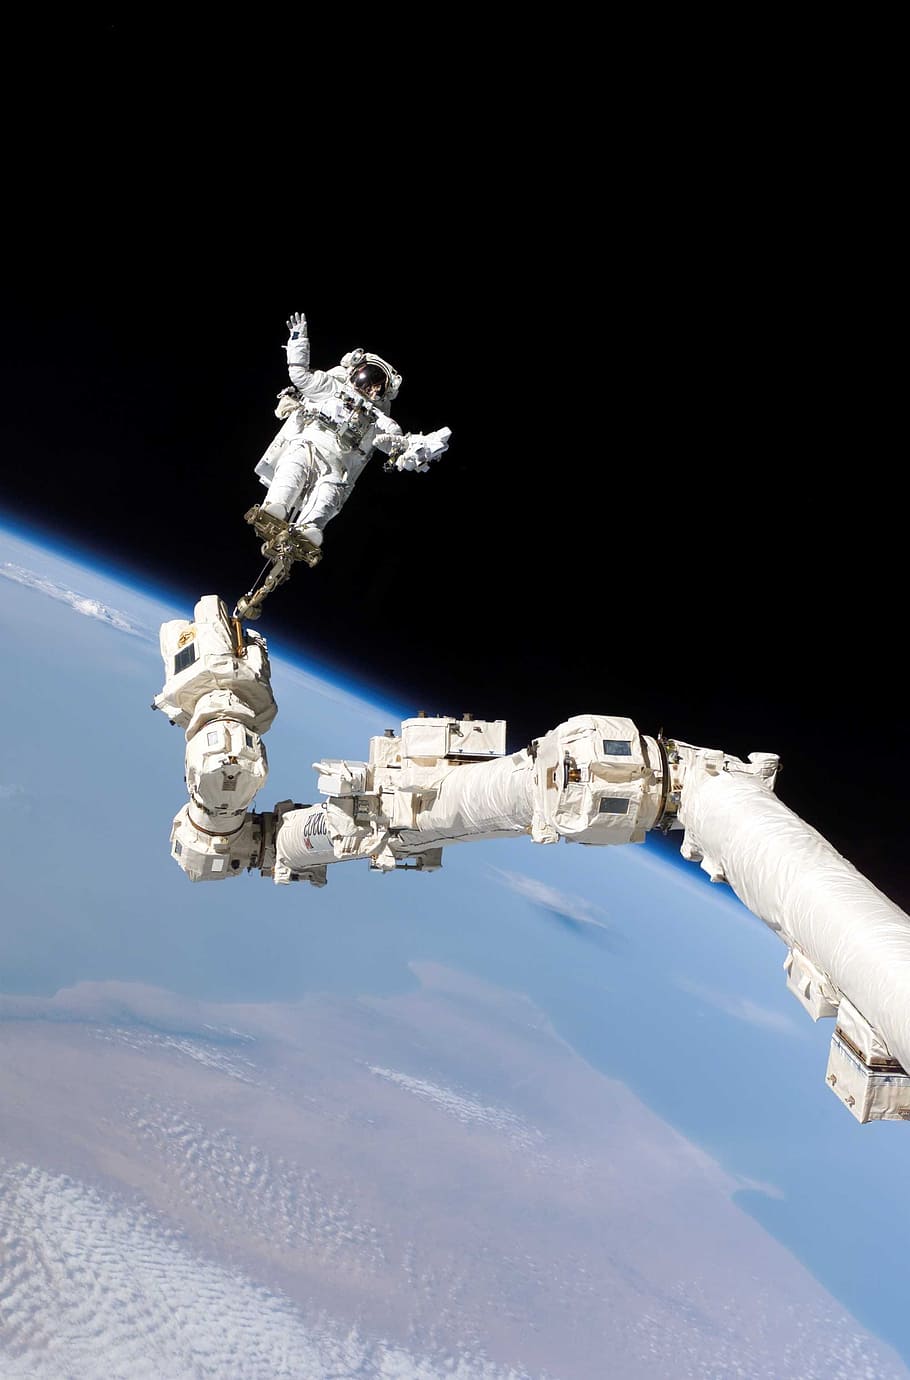 Astronaut taking selfie outside of the earth, space walk, international space station